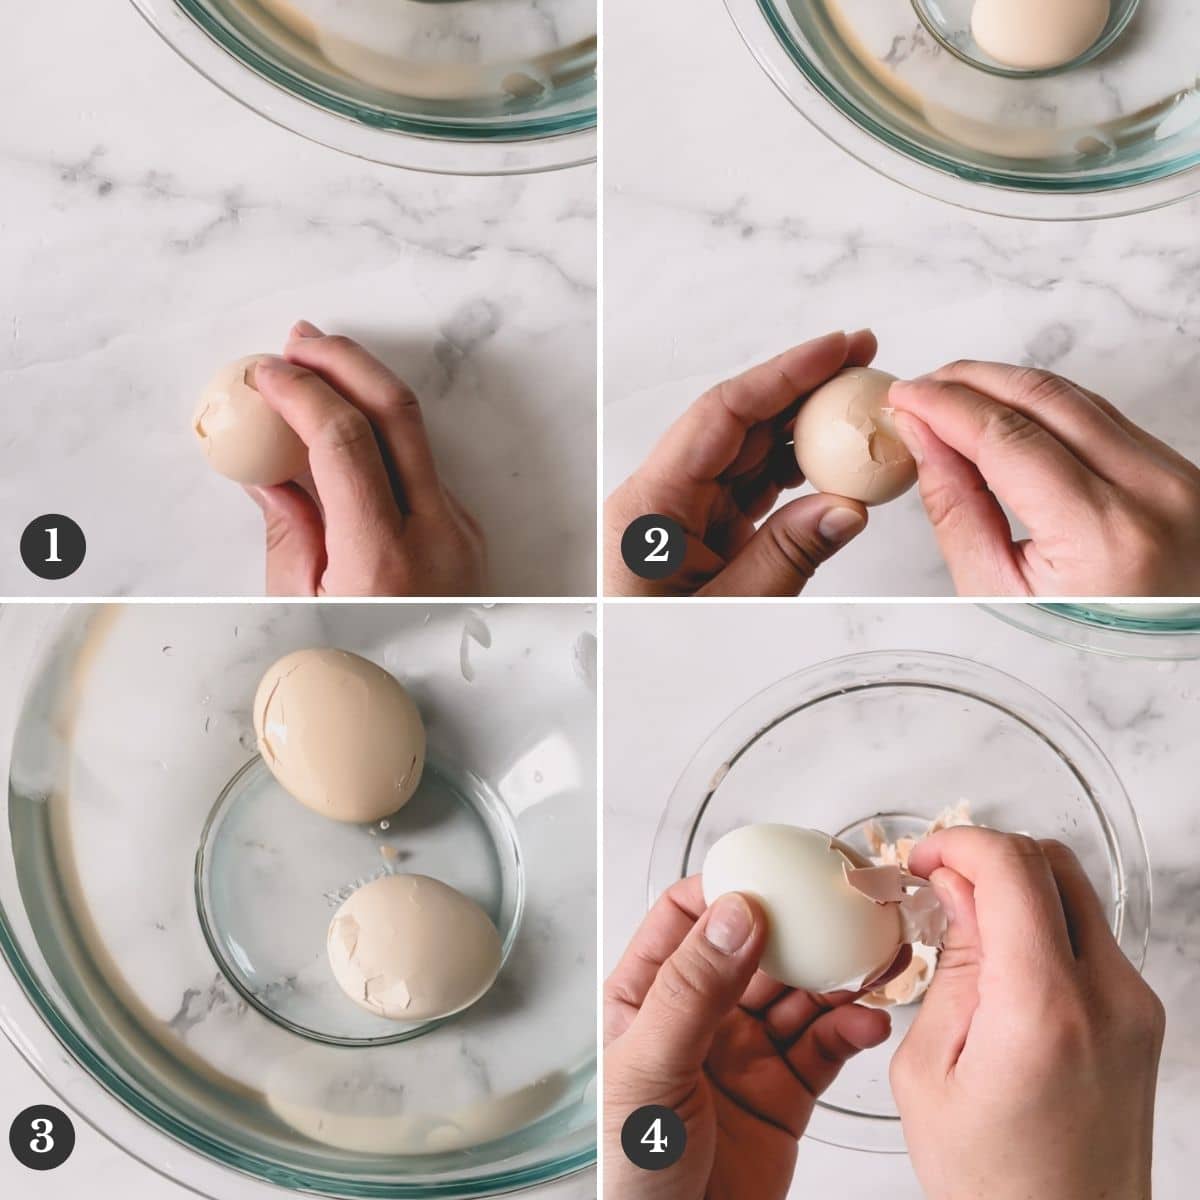 Step by step images of peeling a hard boiled egg.